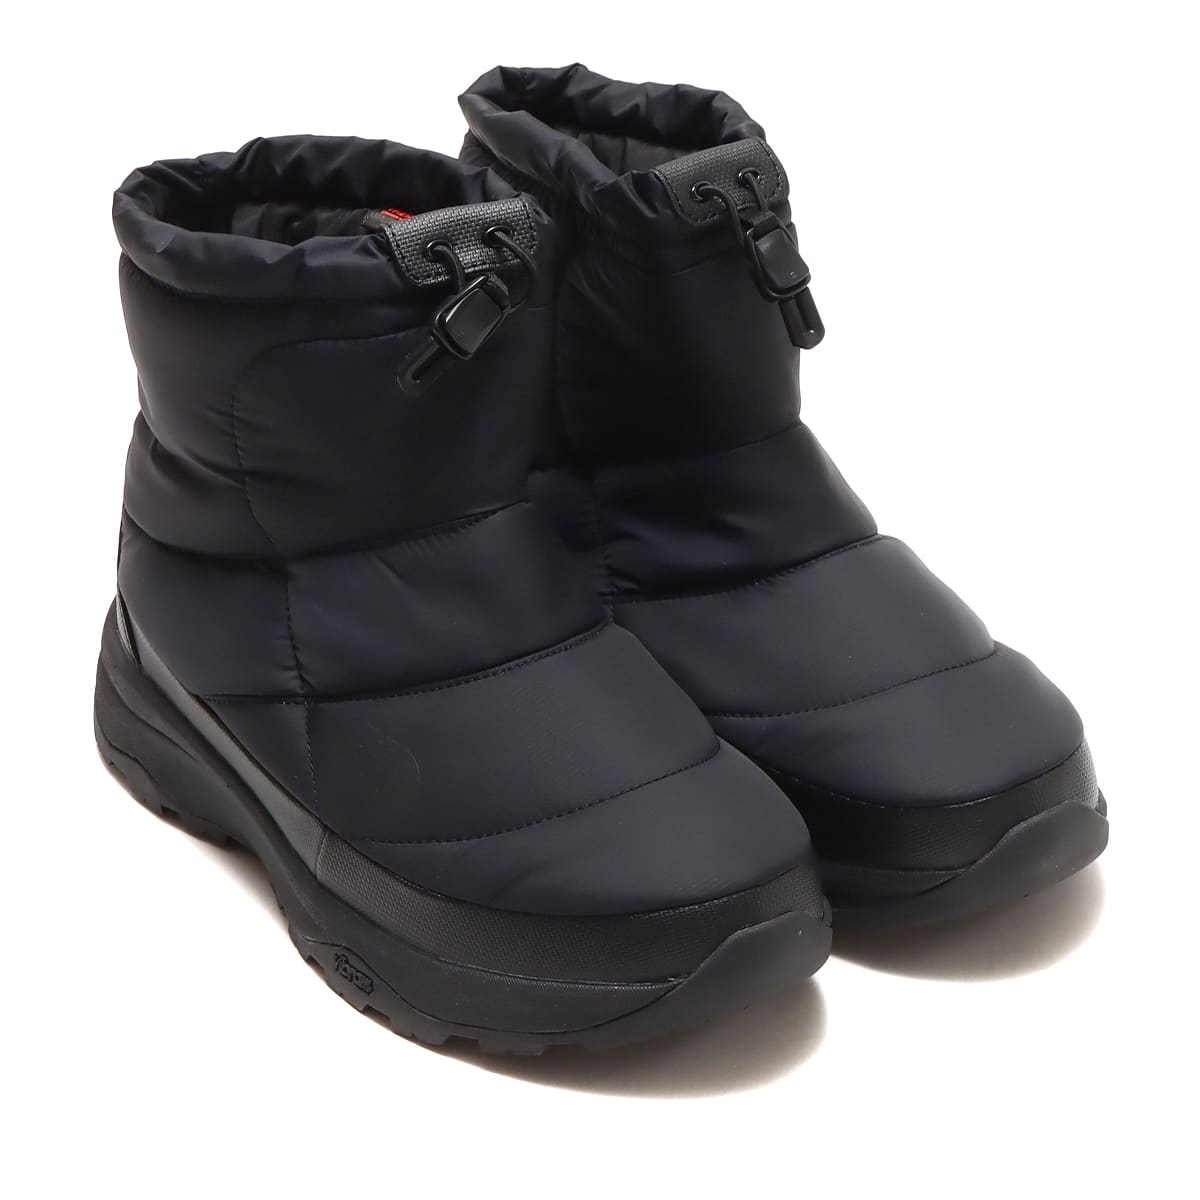 28 THE NORTH FACE Nuptse Bootie WP